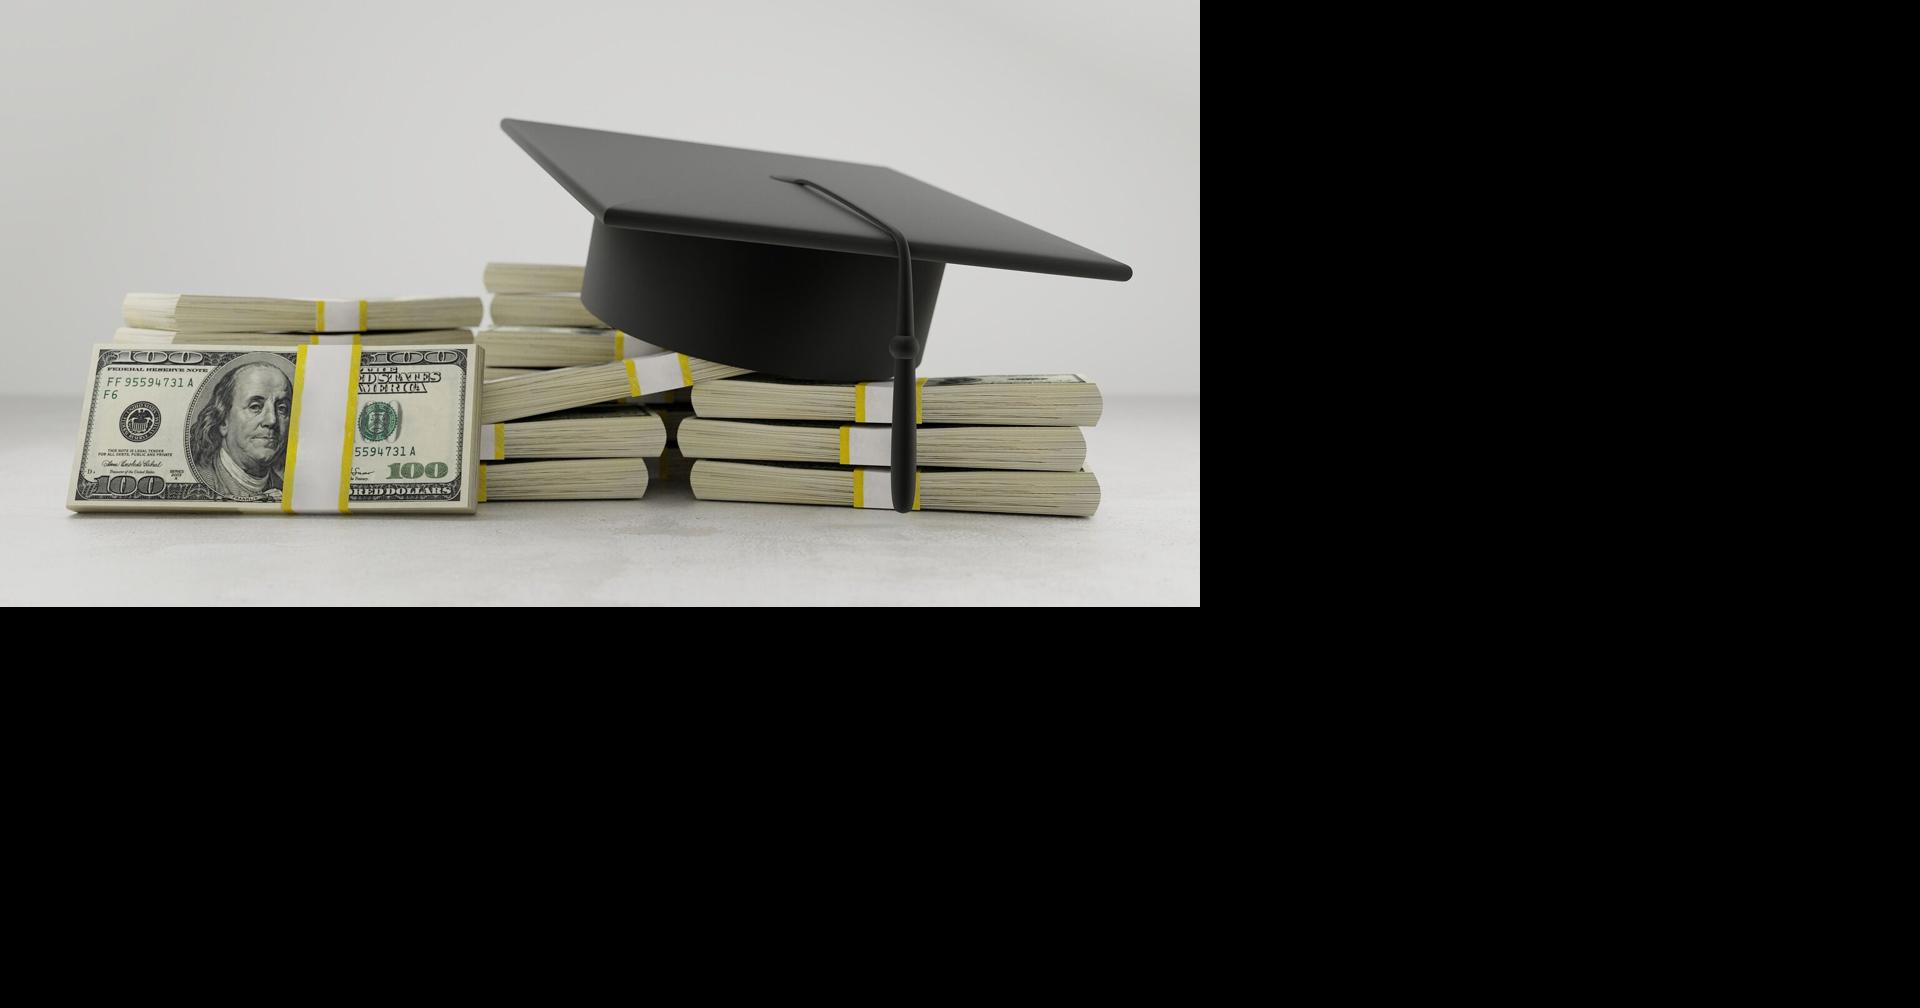 Senators Murray, Wyden and more push for student debt relief expansion – nbcrightnow.com